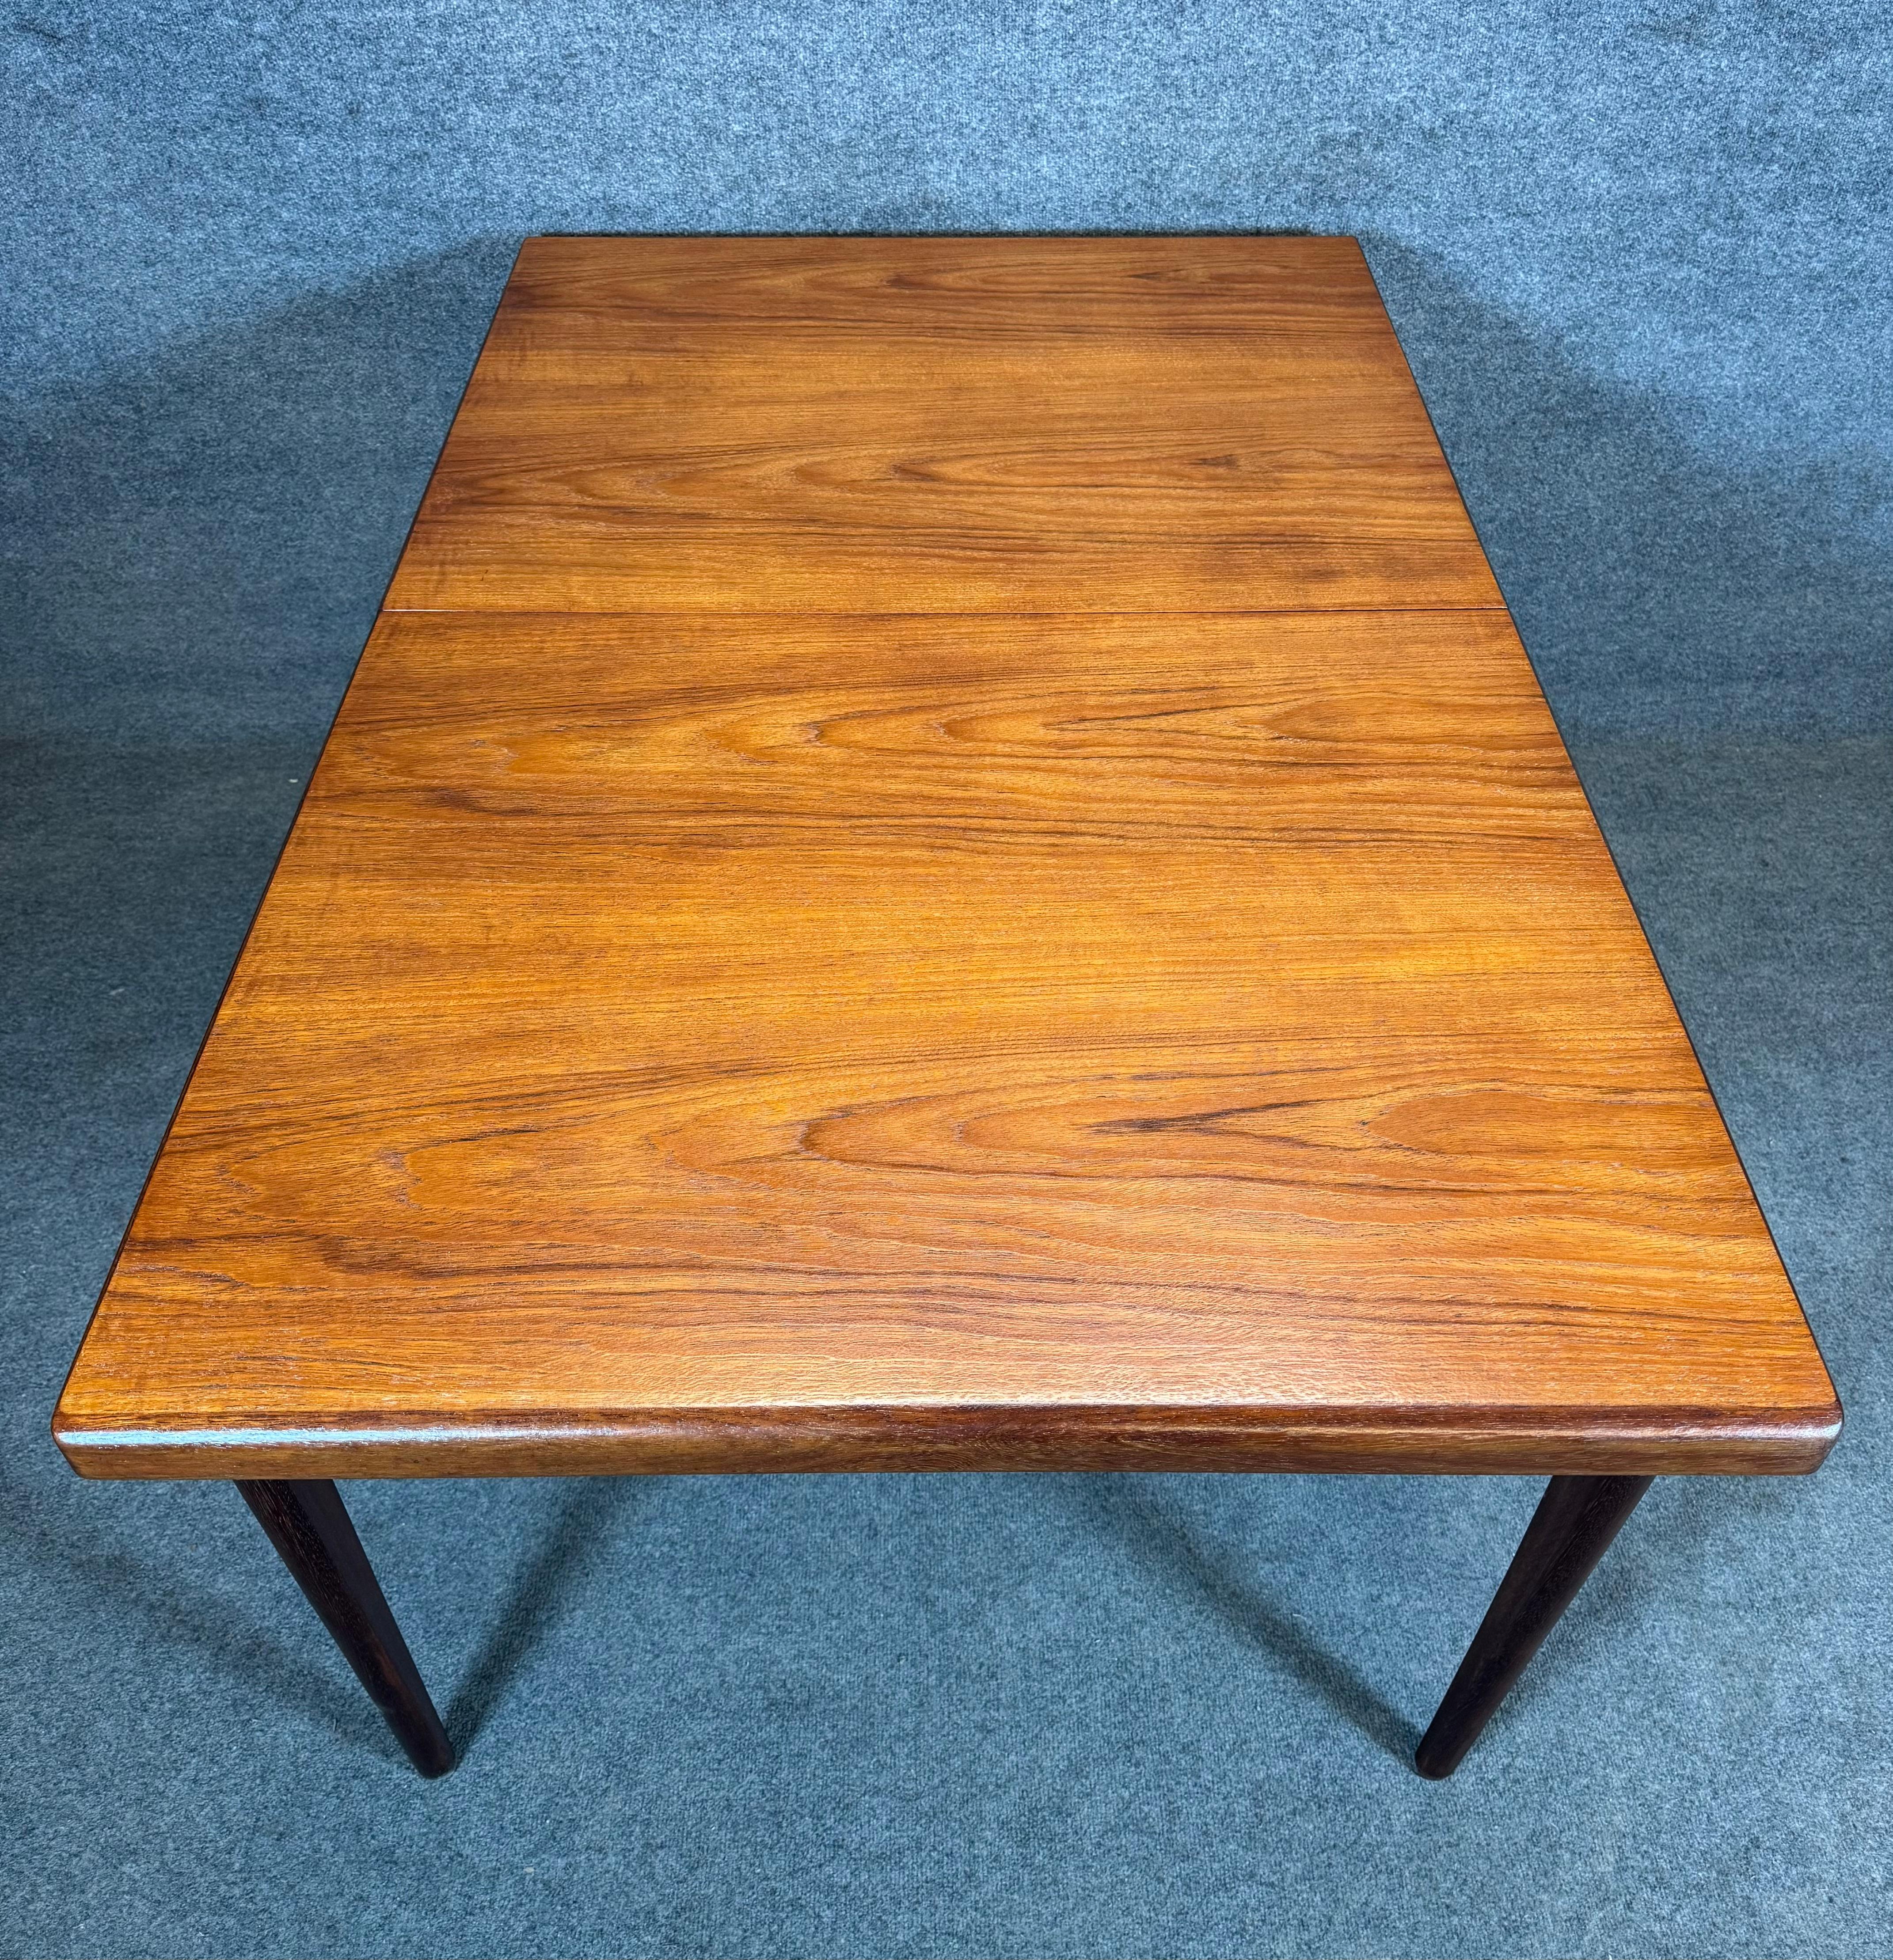 Vintage Mid Century Modern Teak Dining Table by John Herbert for A. Younger Ltd. In Good Condition For Sale In San Marcos, CA